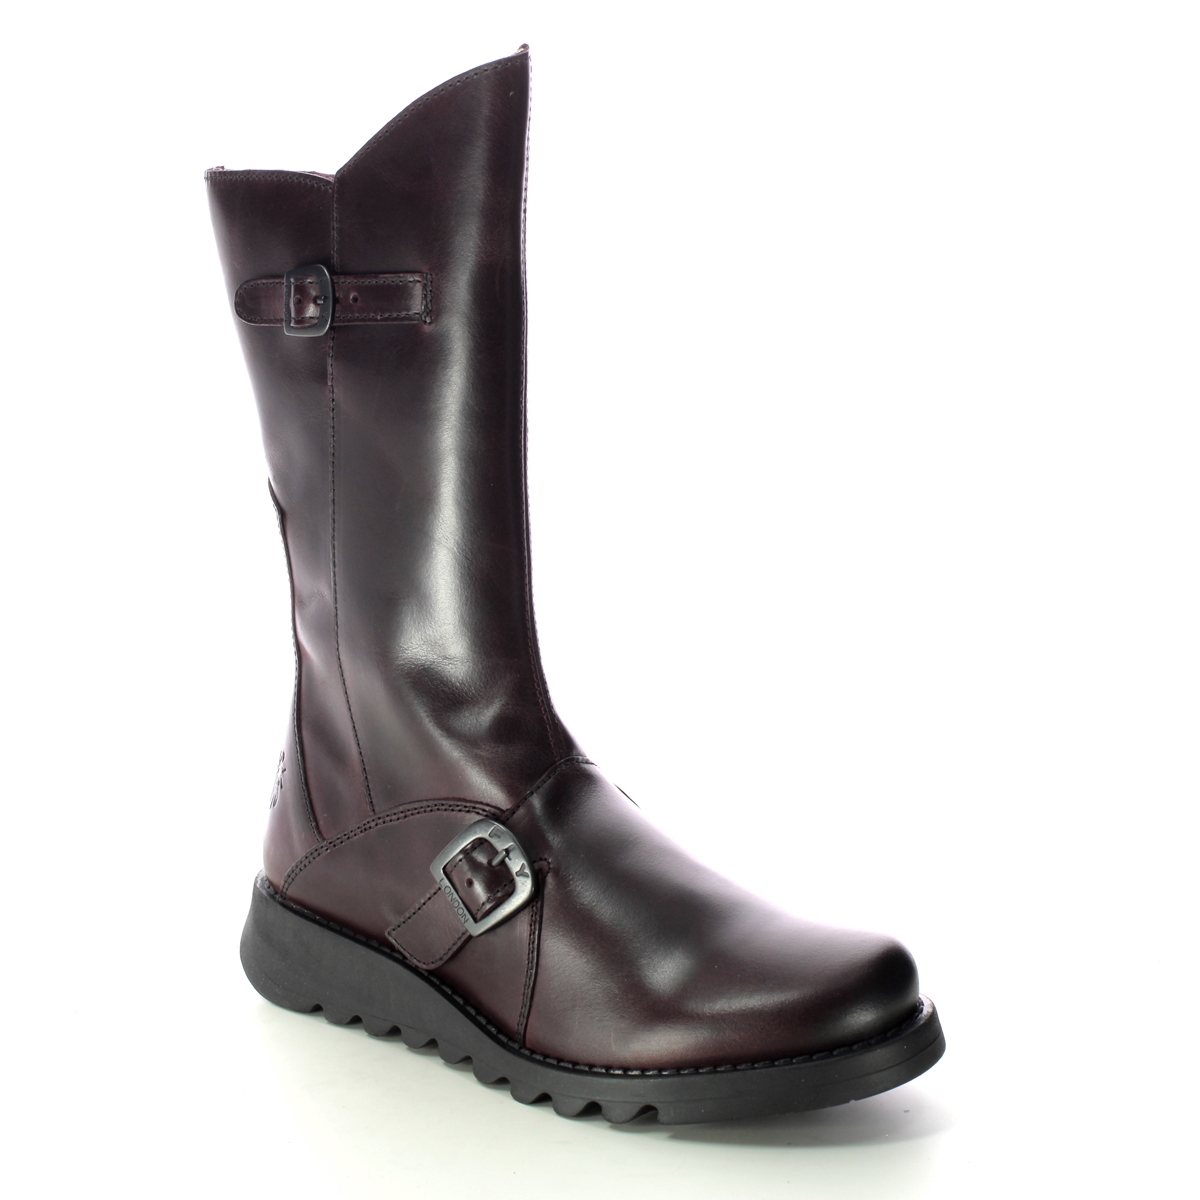 Fly London Mes 2 Wine Leather Womens Mid Calf Boots P142913 In Size 39 In Plain Wine Leather